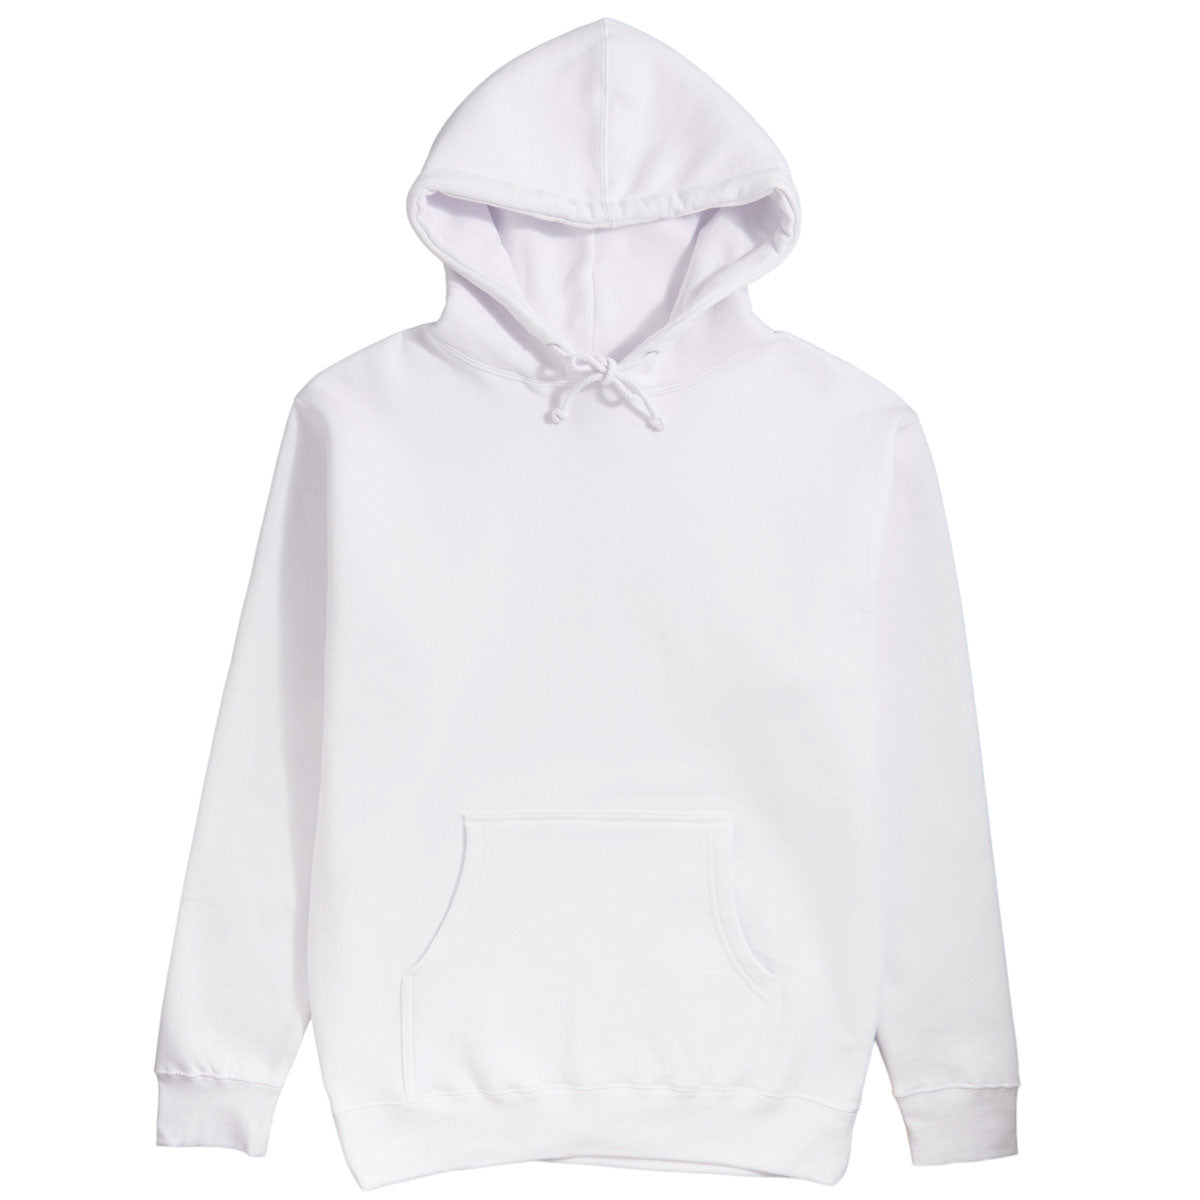 Converse Body Horror Pullover Hoodie - White - SM image 1